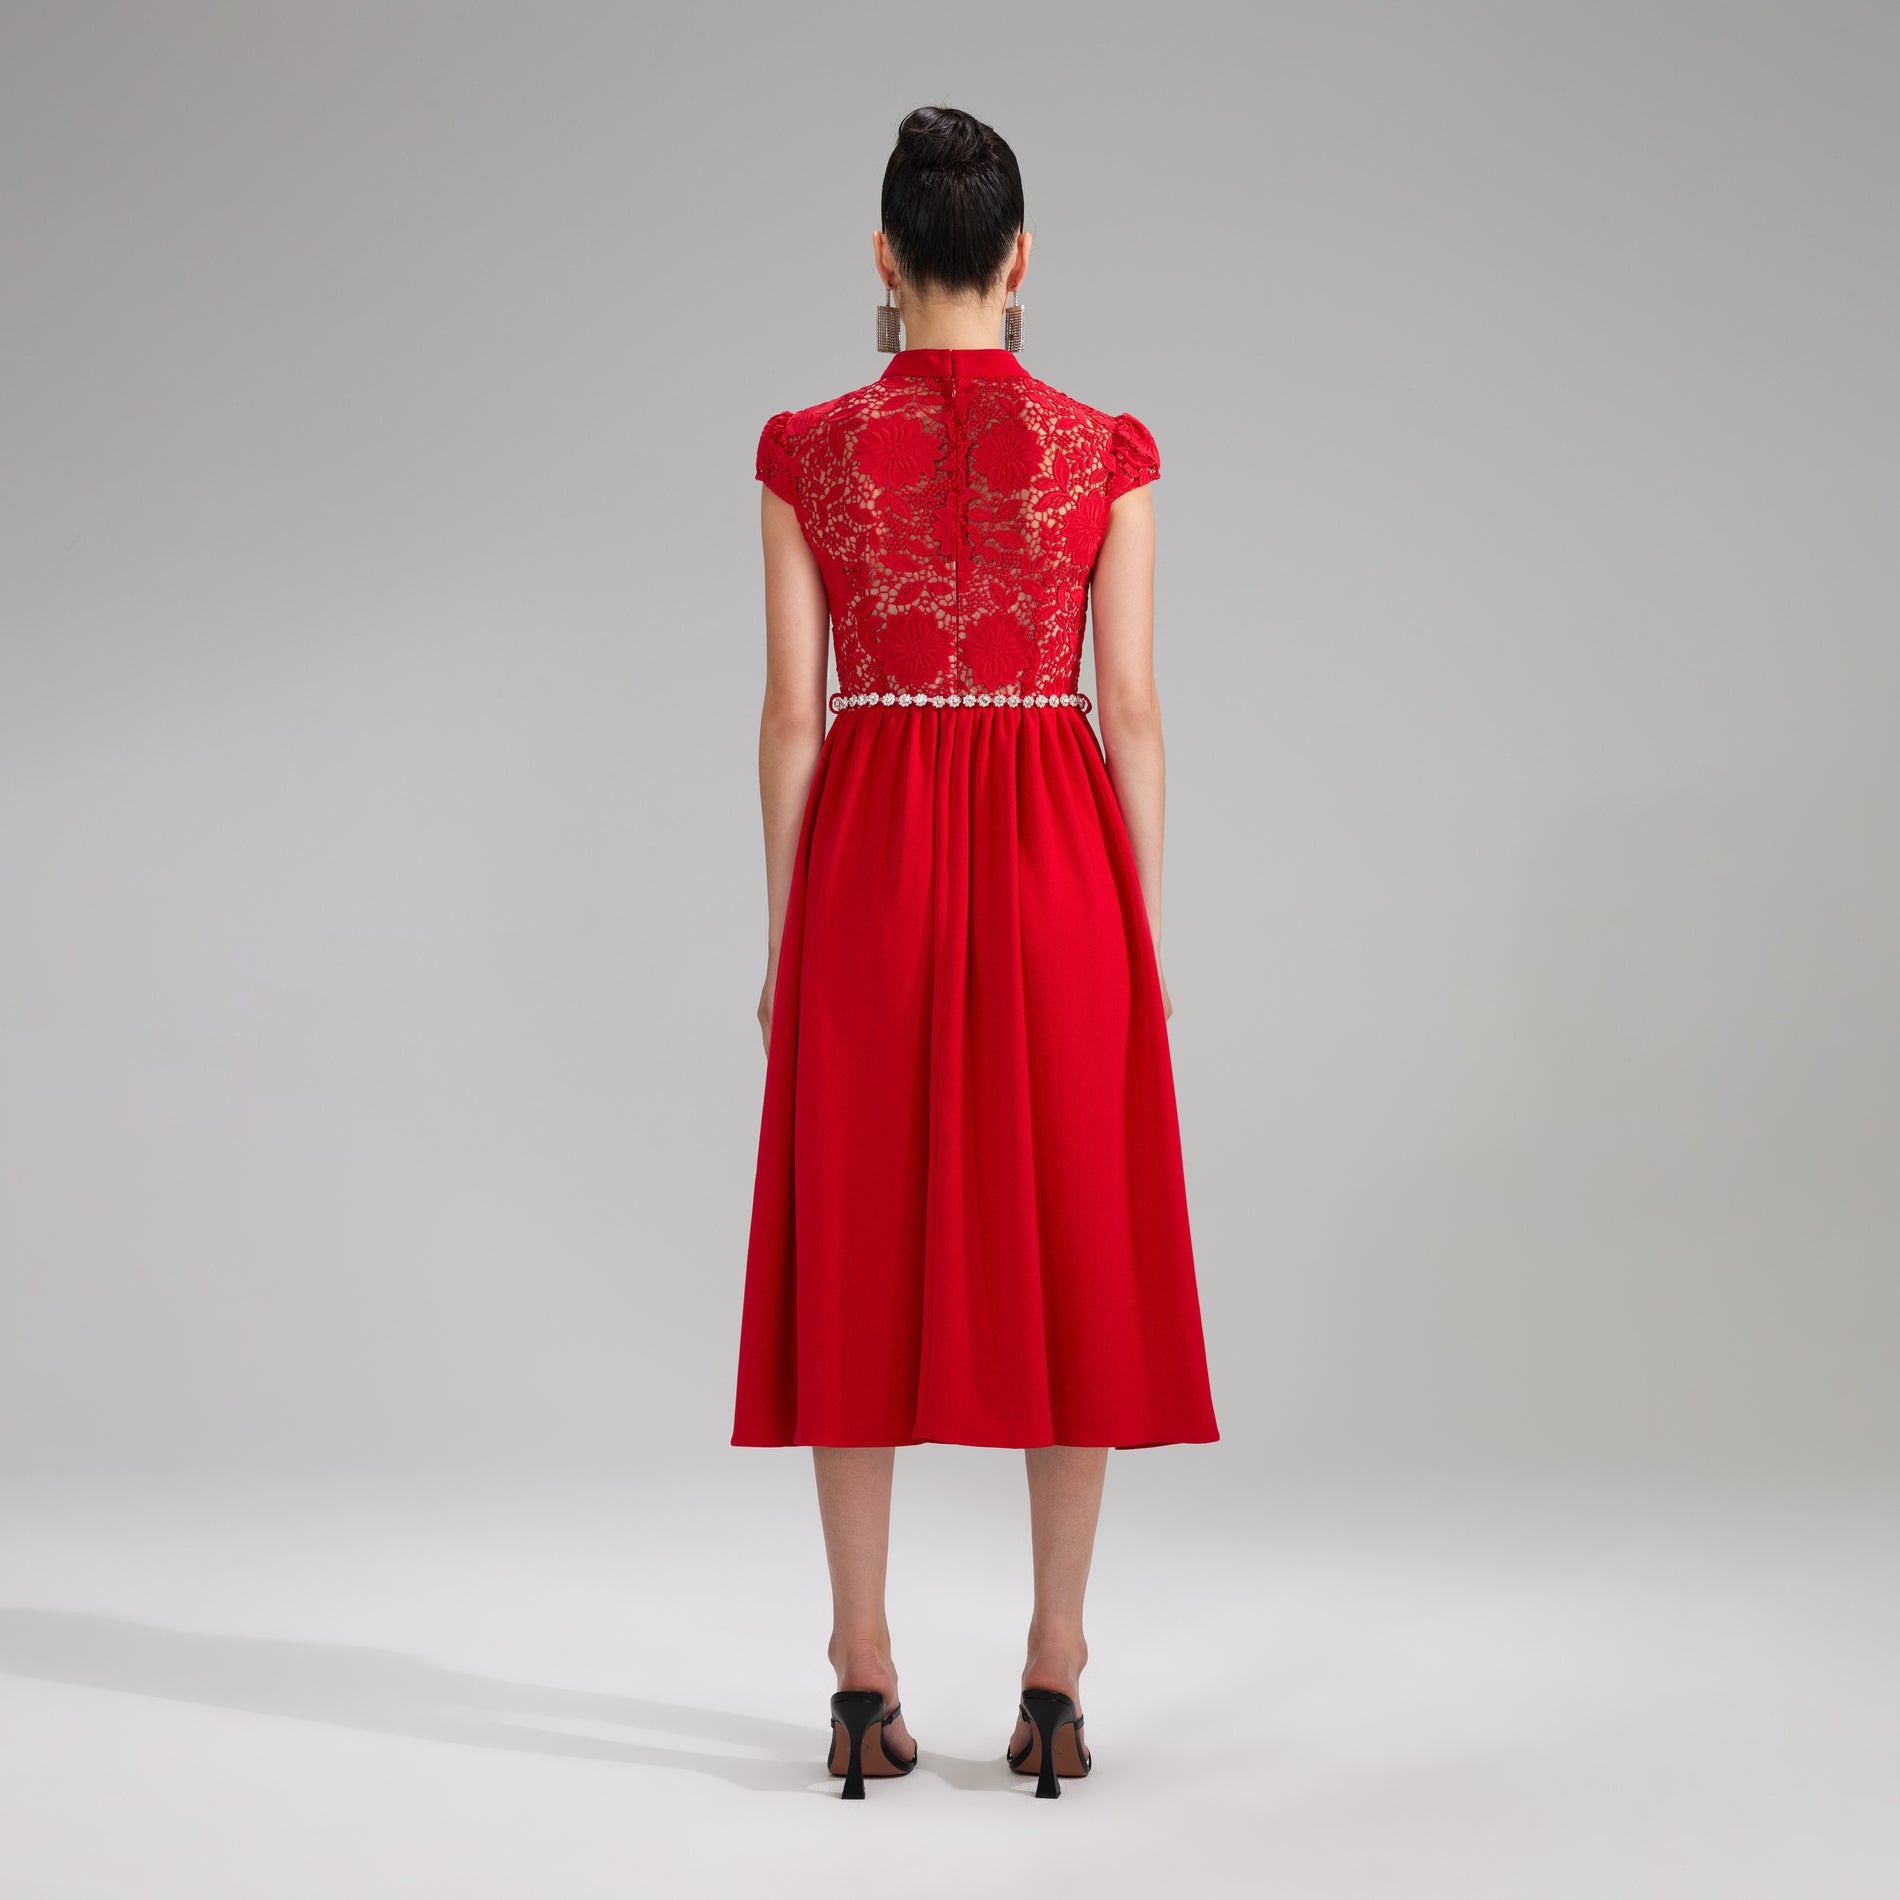 A woman wearing the Red Lace Cotton Midi Dress